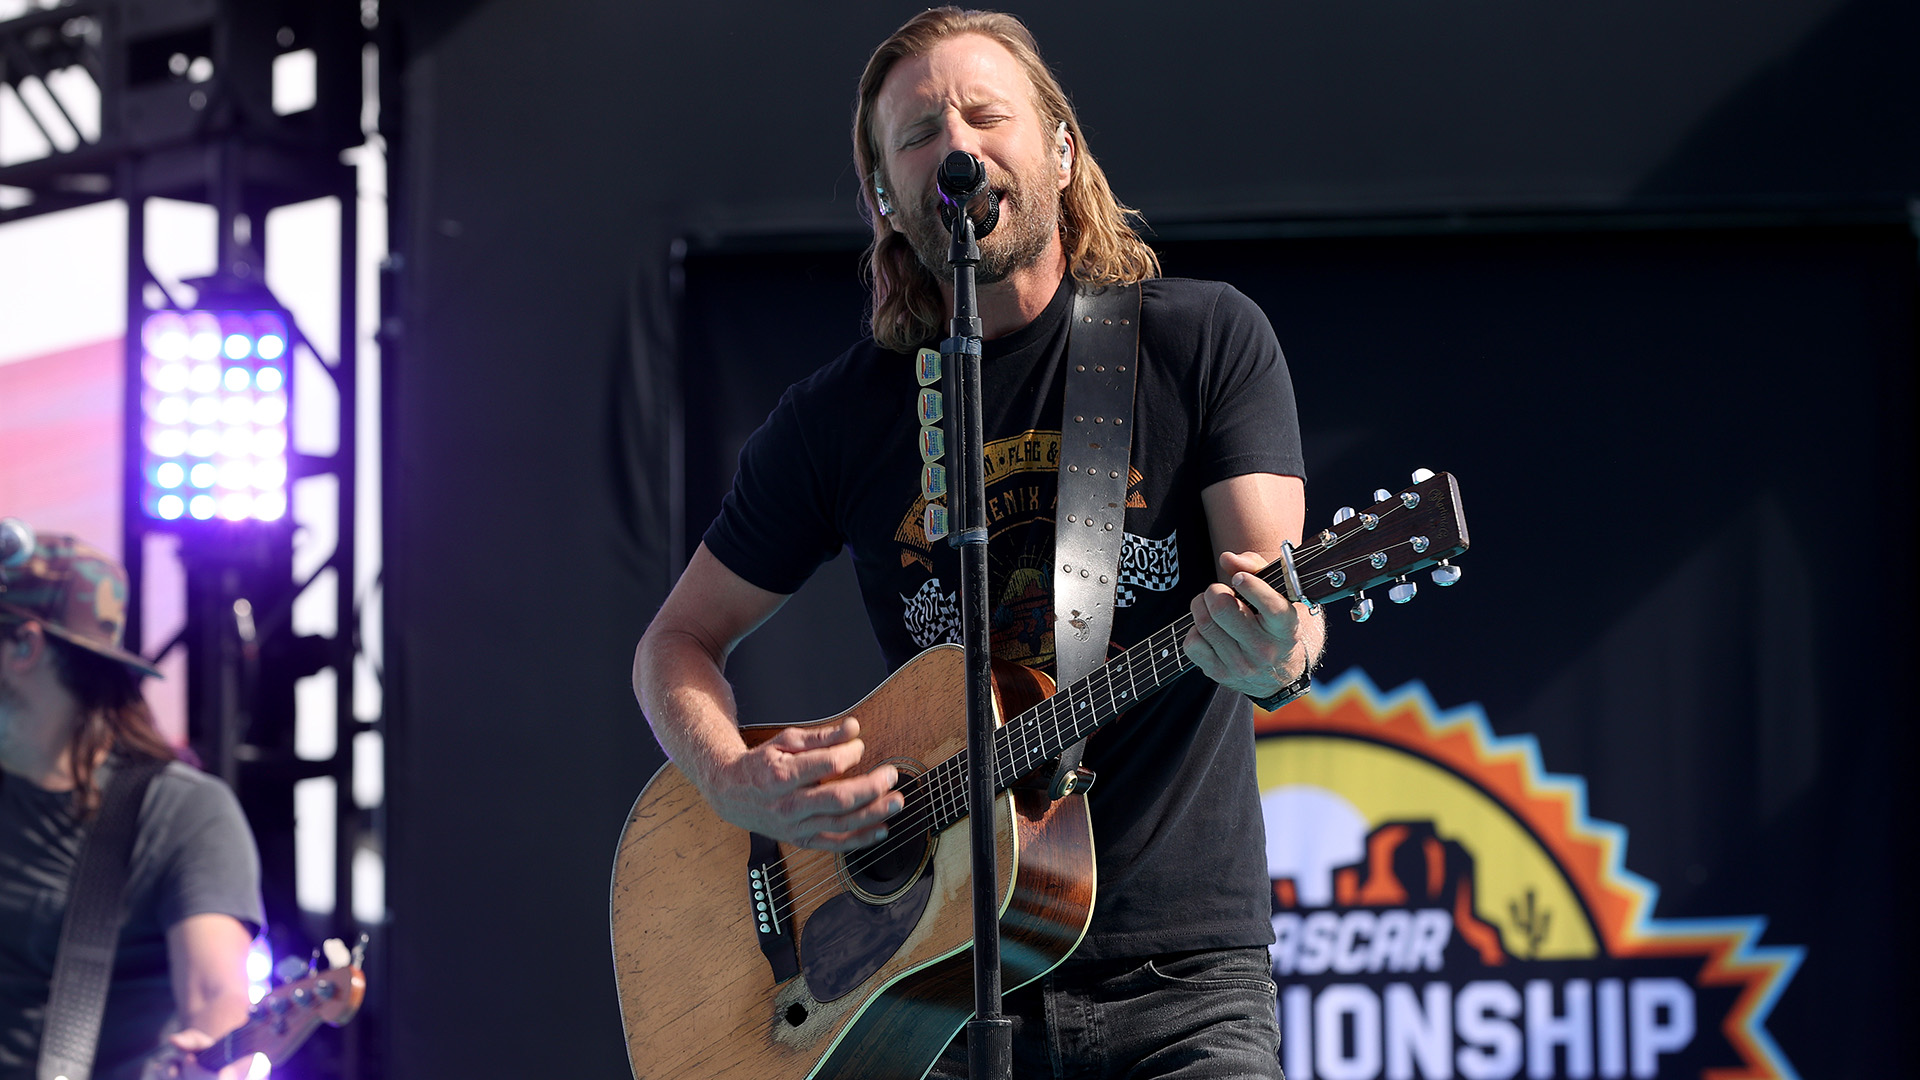 Dierks Bentley performs during pre-race ceremonies prior to the NASCAR Cup Series Championship at Phoenix Raceway on November 7, 2021 in Avondale, Arizona.